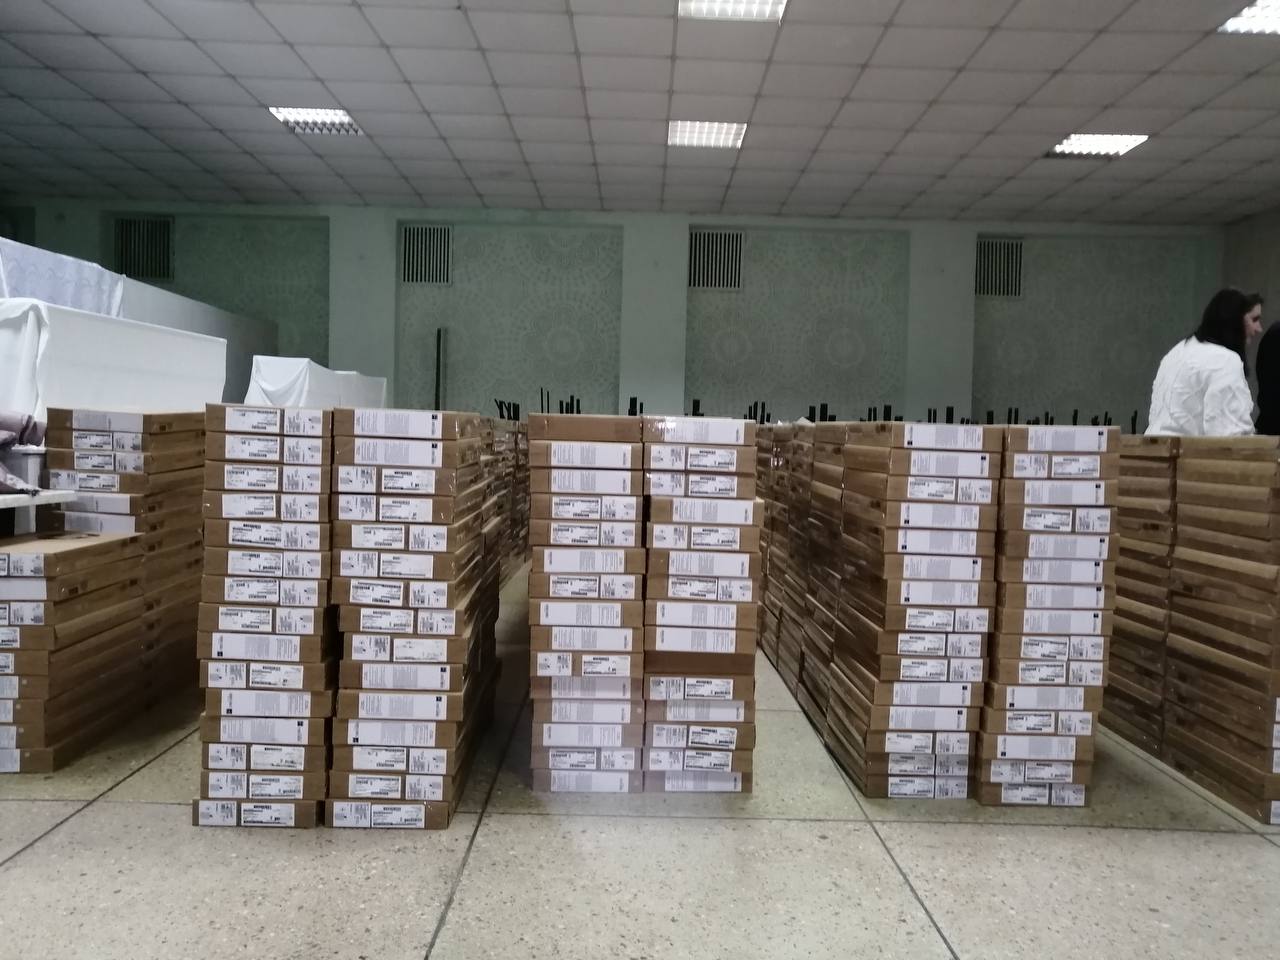 2,857 laptops were received by teachers of the Dnipropetrovsk region and Donetsk region